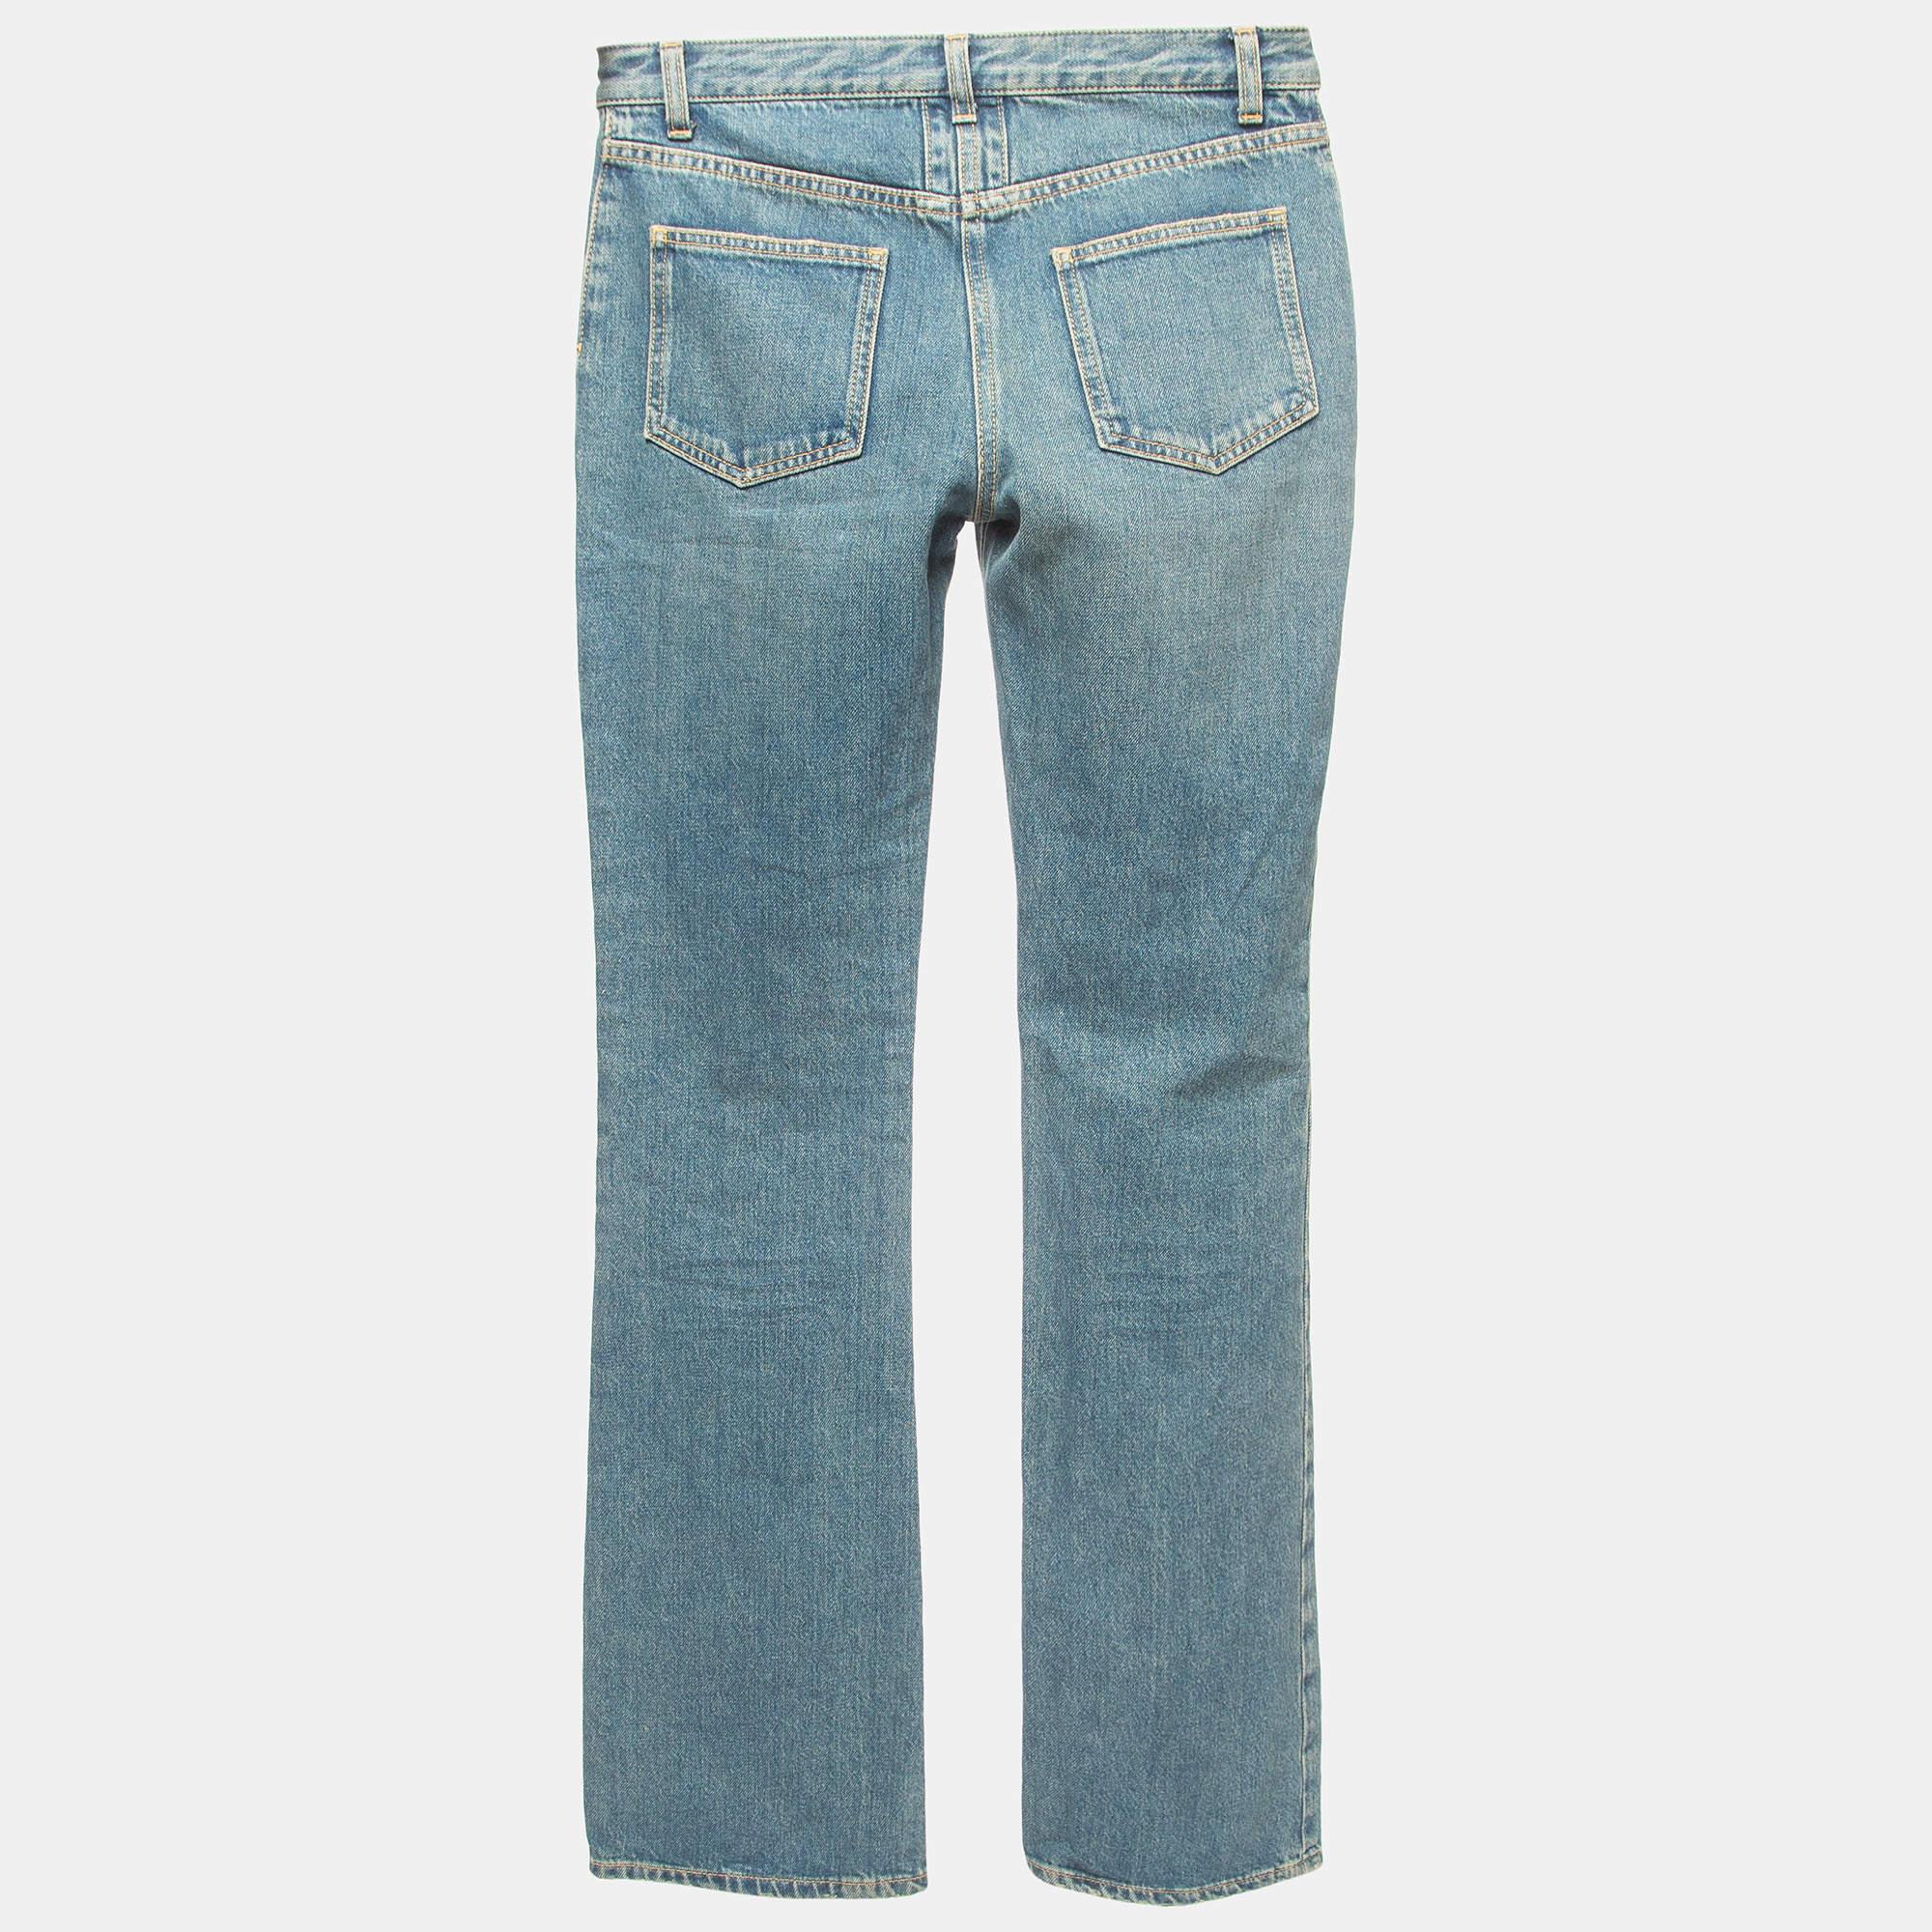 These YSL jeans are a must-have wardrobe essential. These blue high-waist jeans can be dressed both up and down for looks that are either casual and comfy or chic and fashionable.

